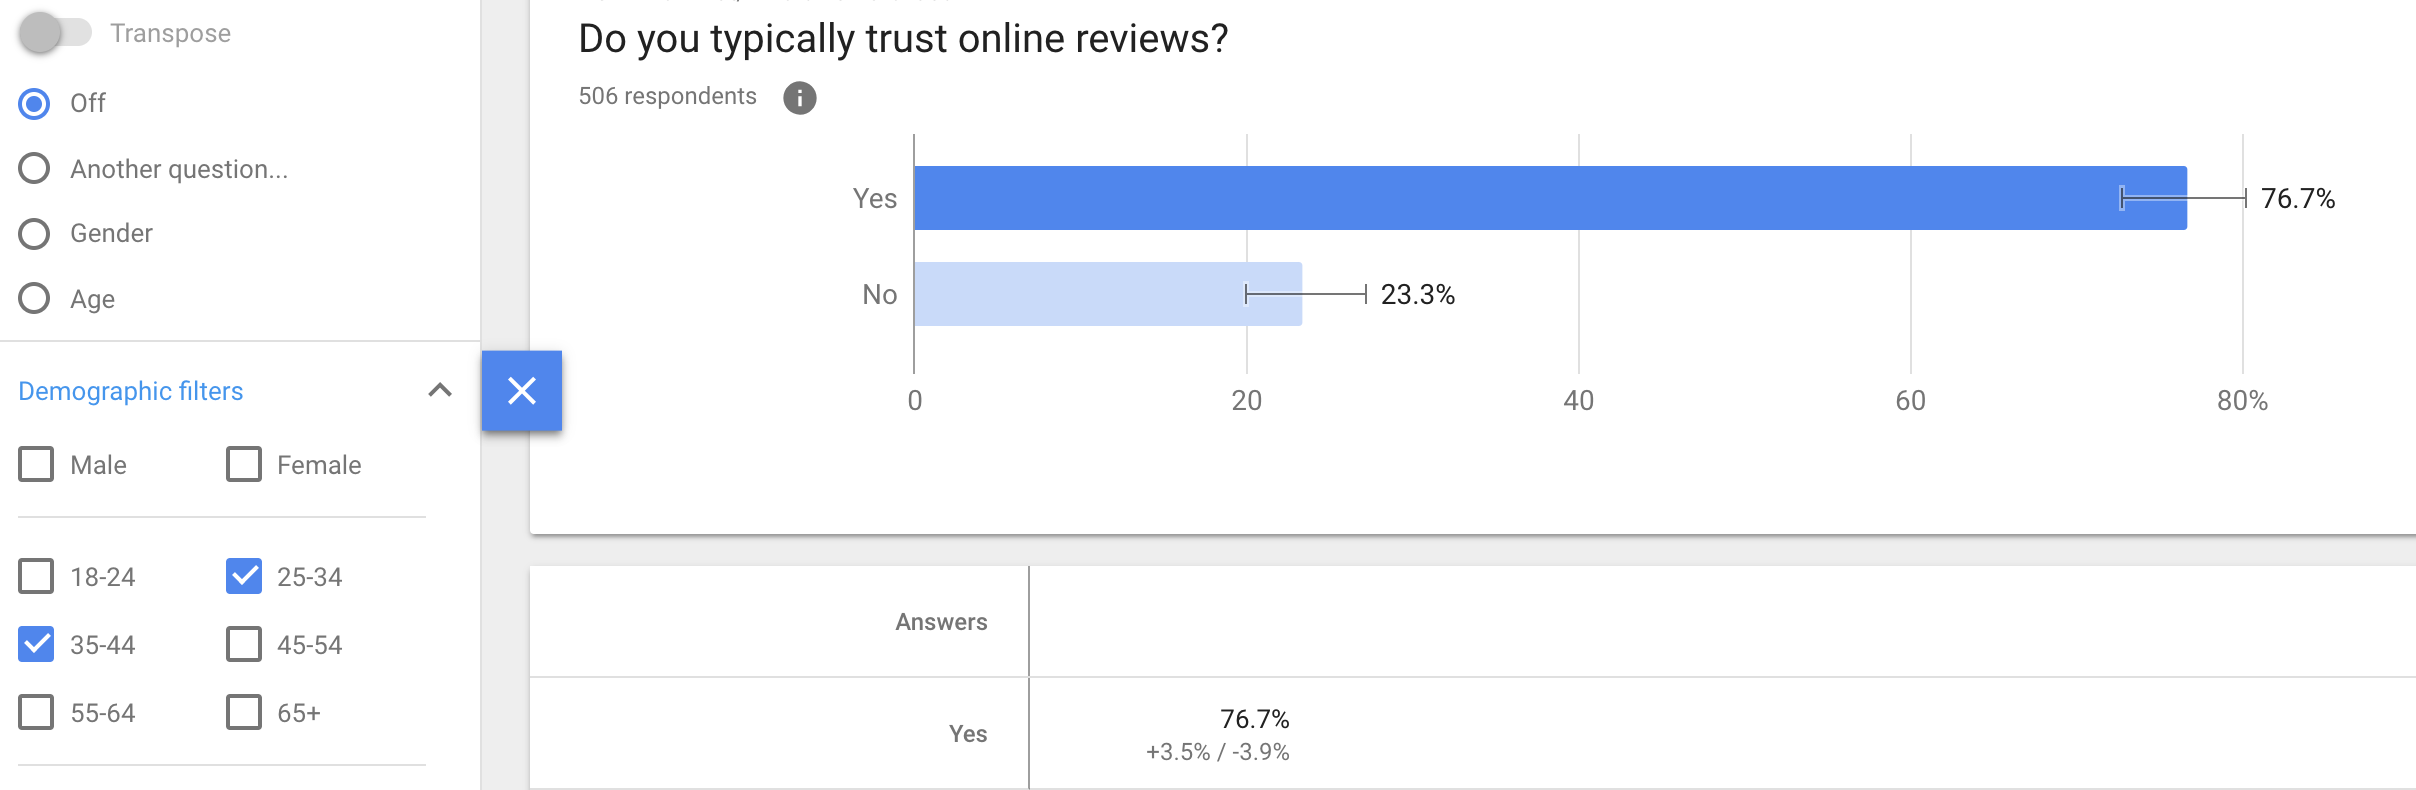 Do you typically trust online reviews? Demographic (25-44)